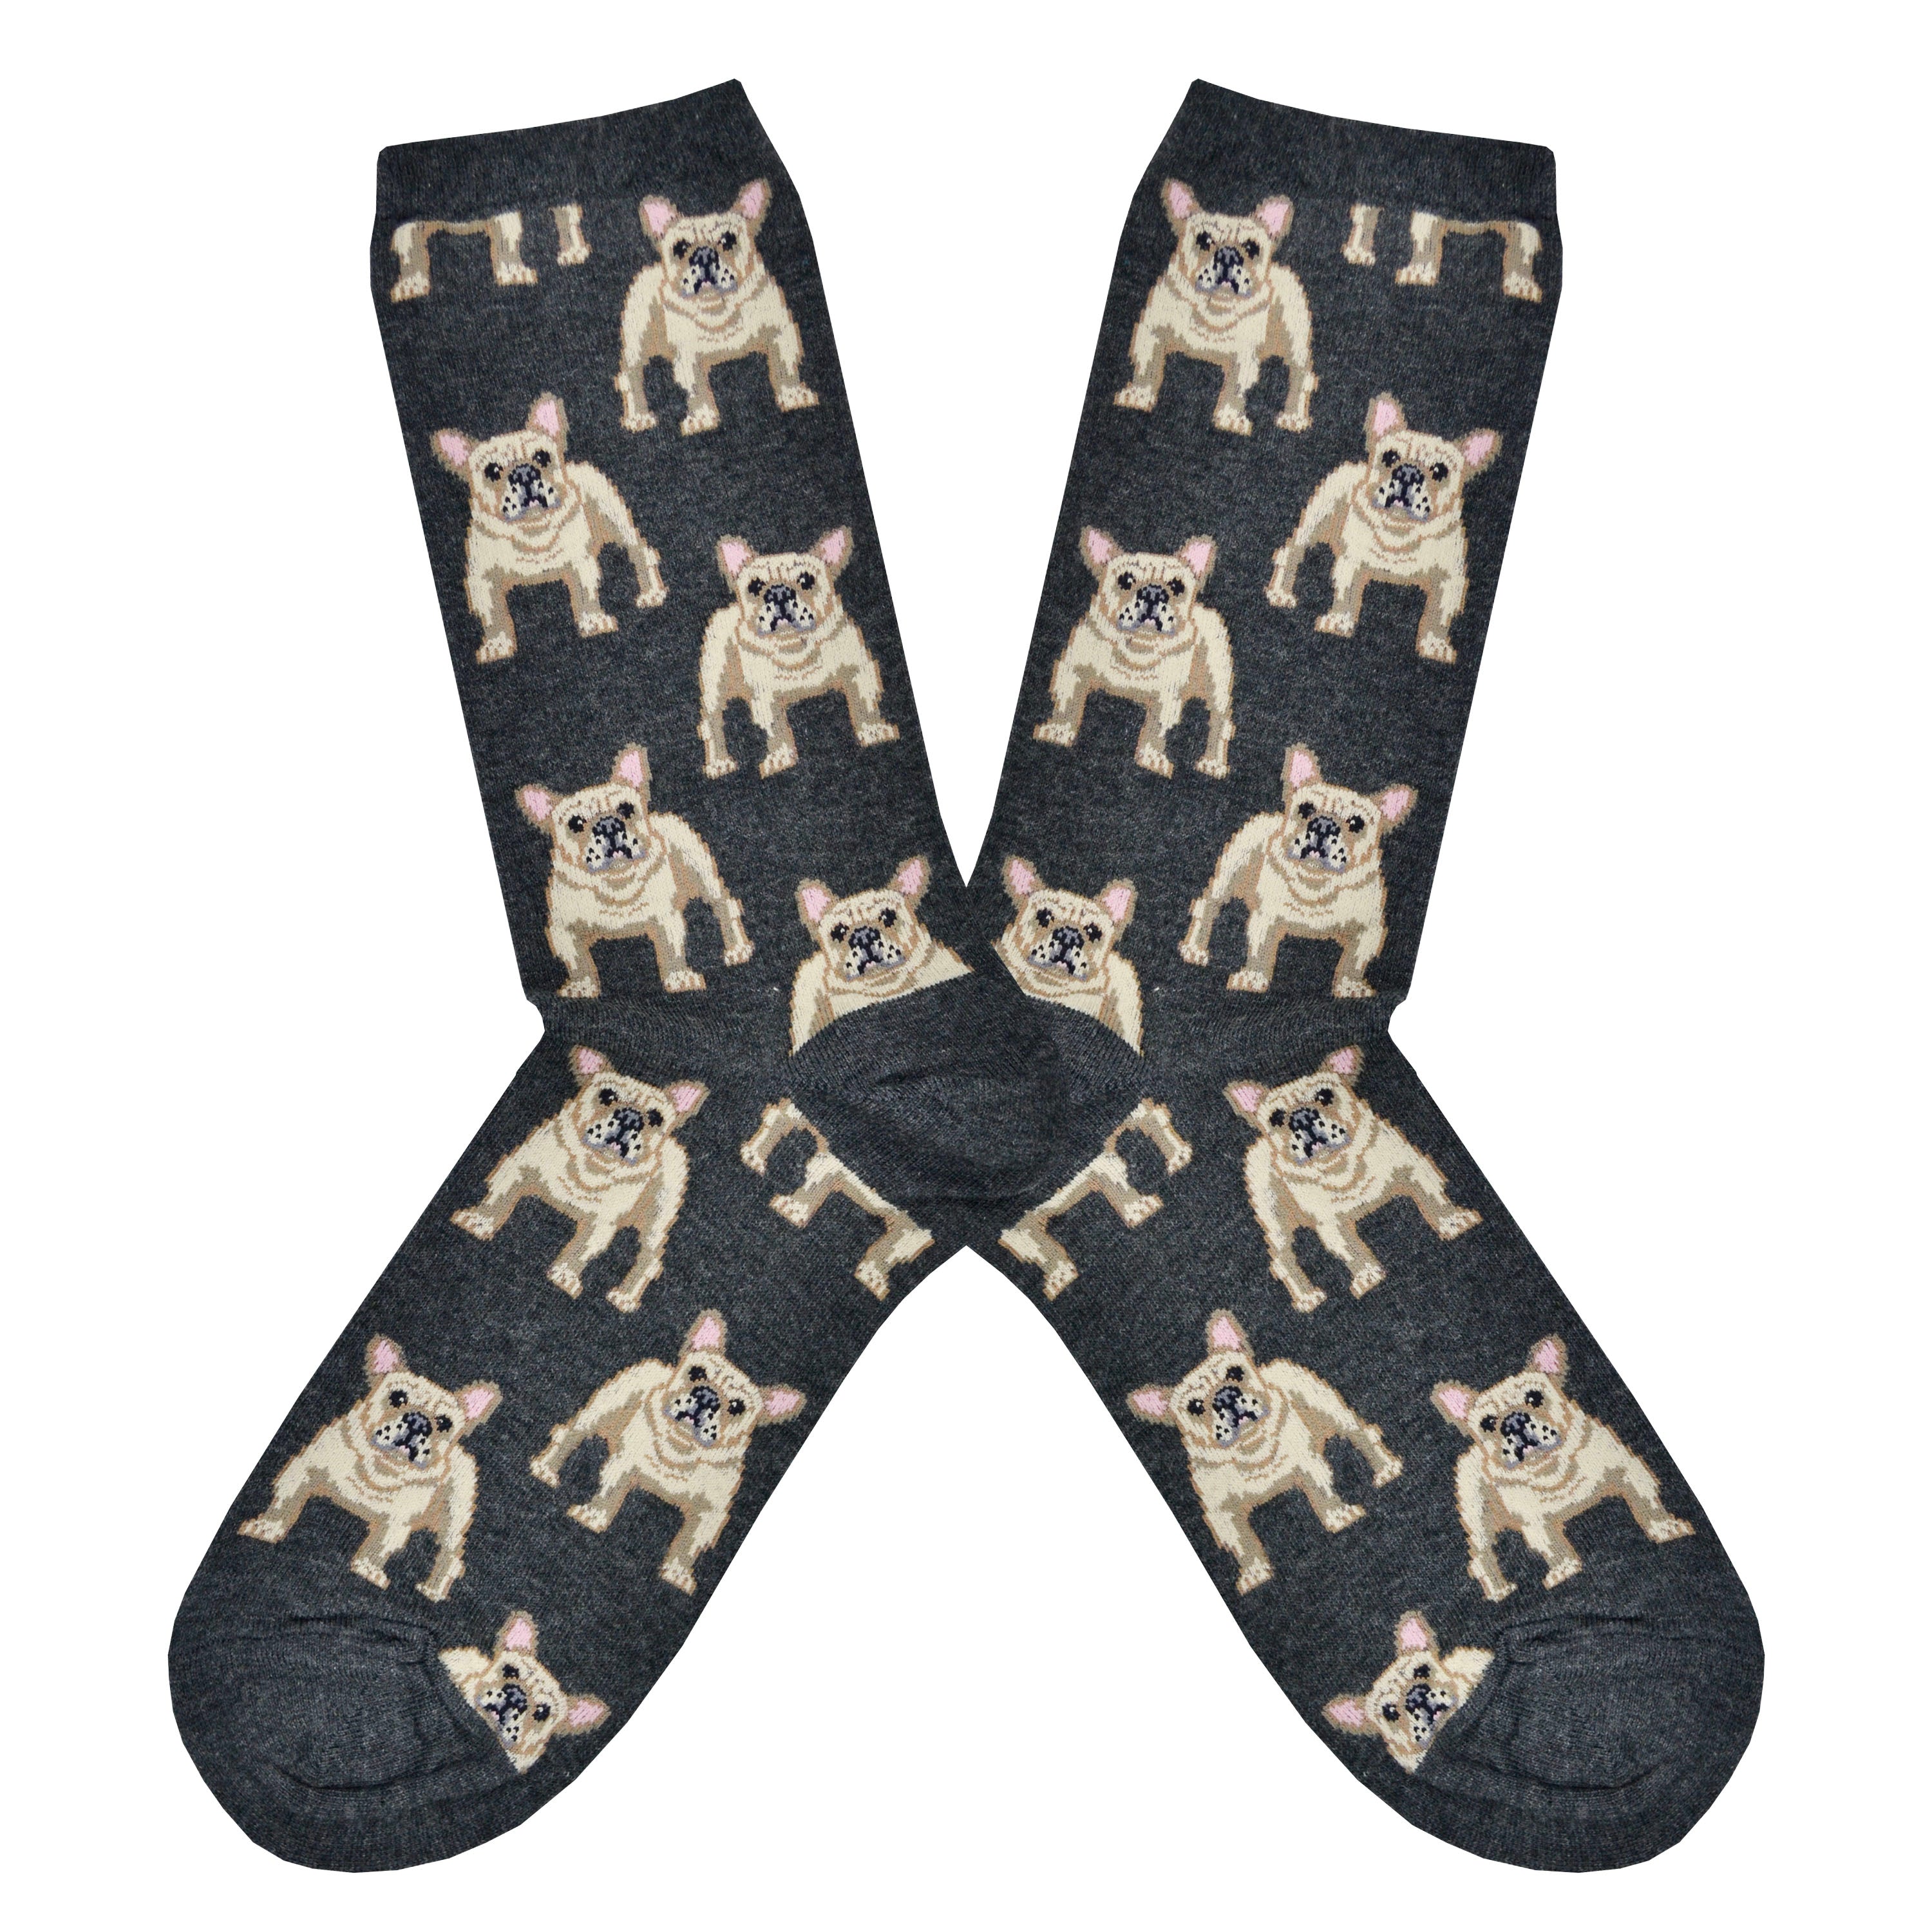 Shown in a flatlay, a pair of women's Socksmith brand cotton crew socks in grey heather. These socks feature an all over motif of blonde Frenchie dogs.